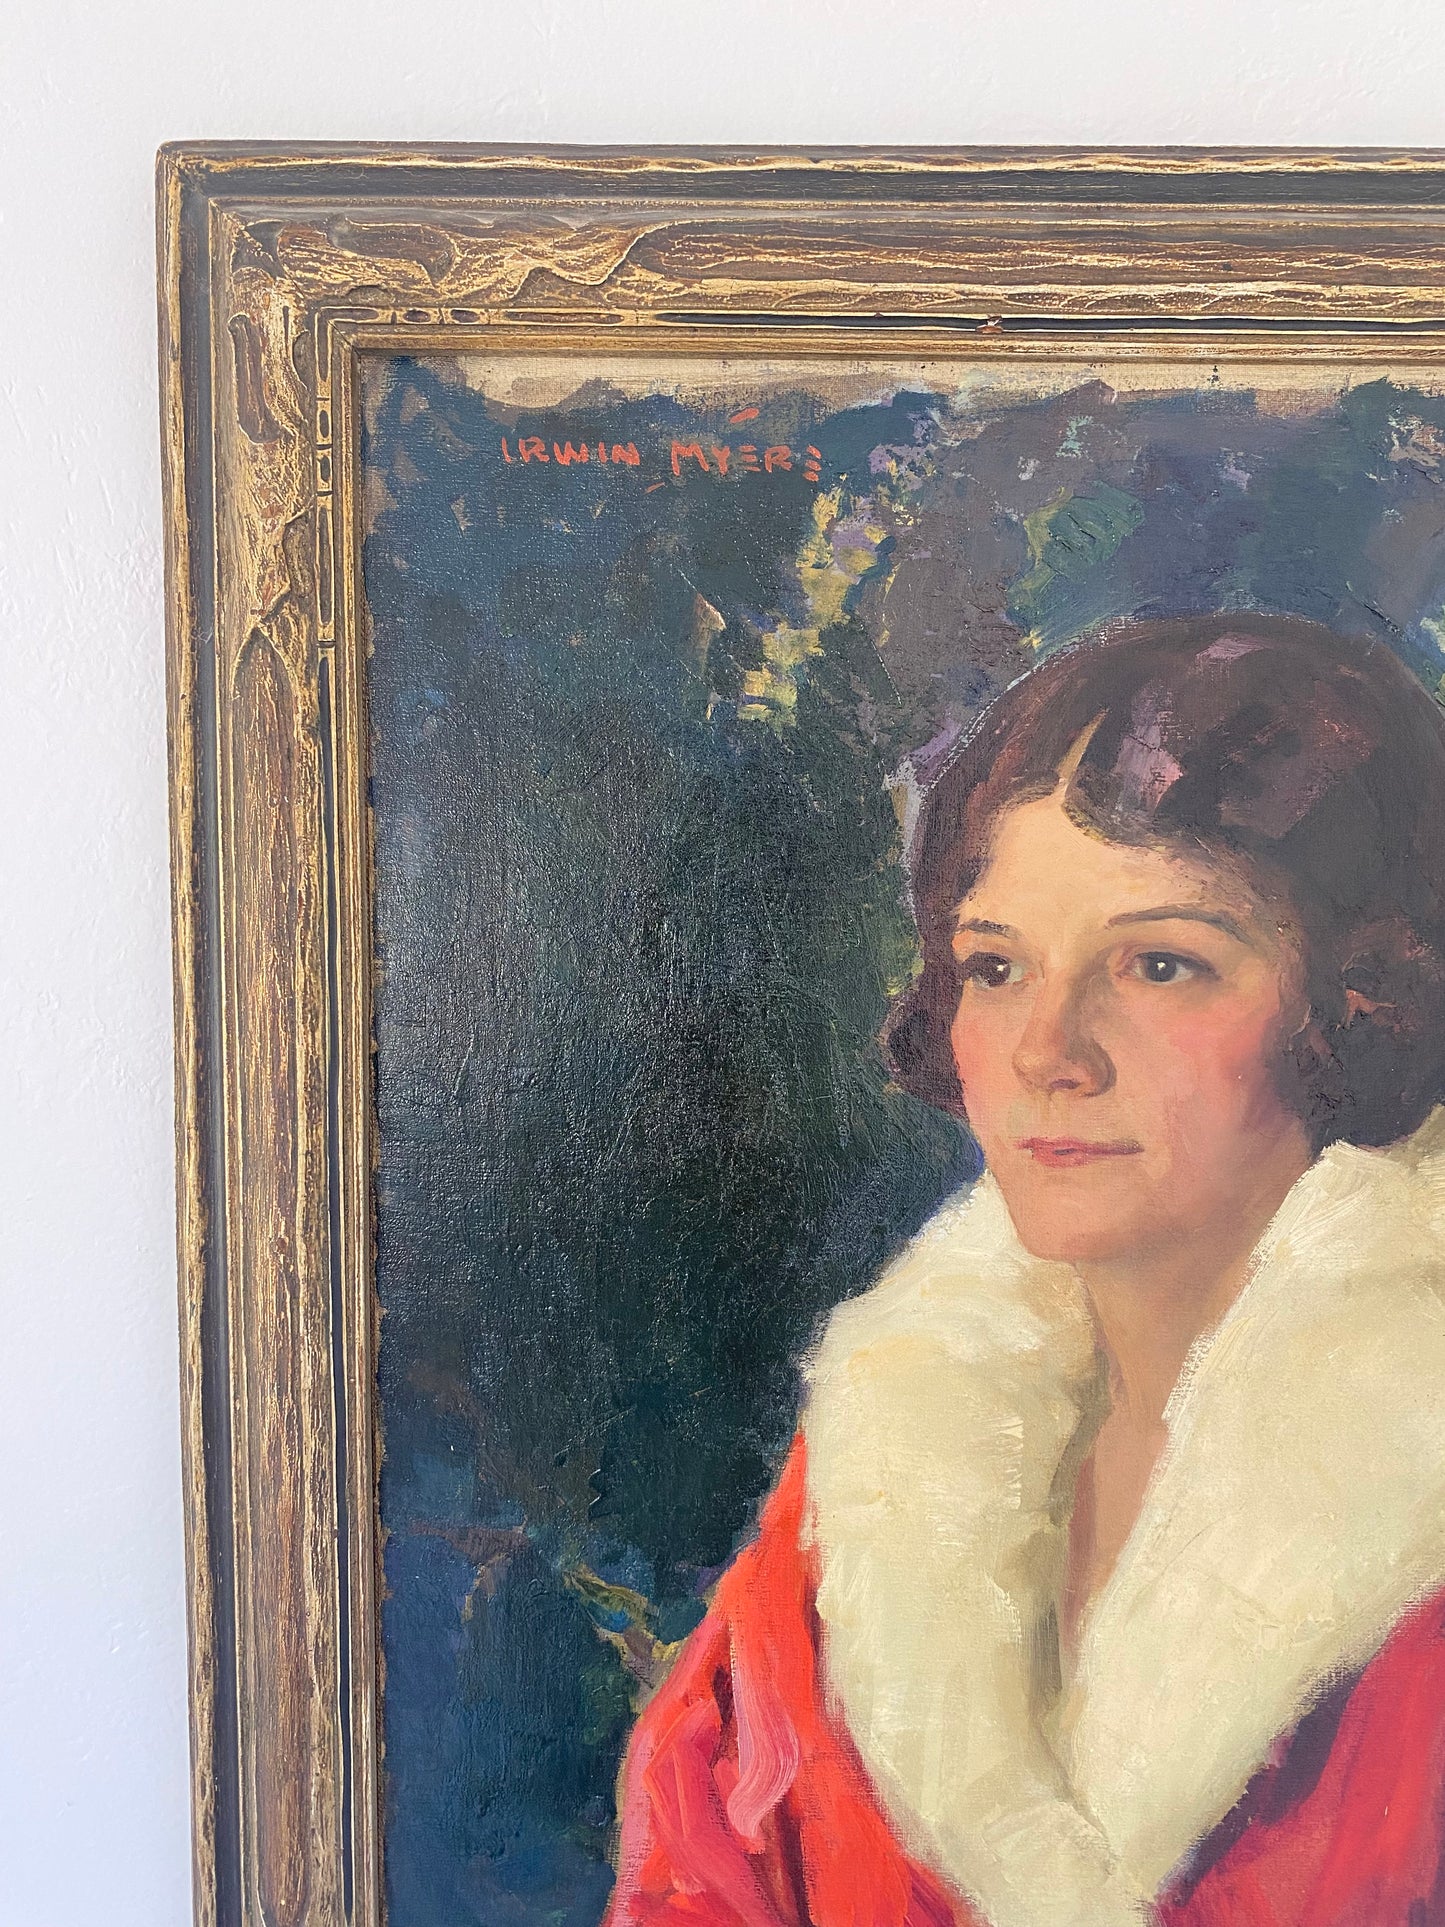 1920s Framed Portrait of A Women in a Coral Opera Coat by Irwin Myers- 25x29”